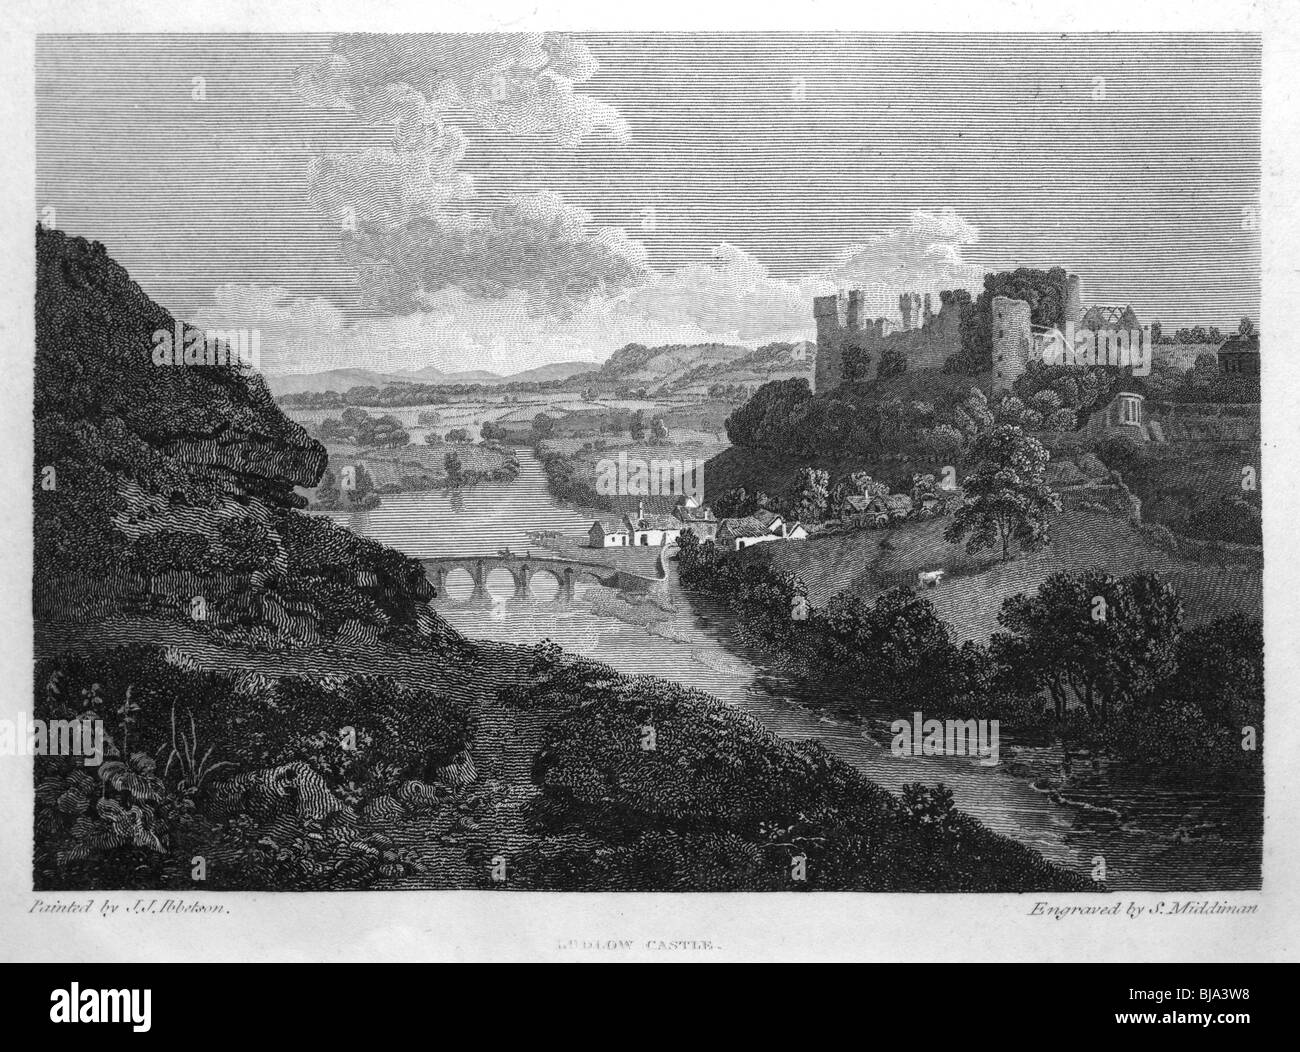 Ludlow castle etching Black and White Stock Photos & Images - Alamy